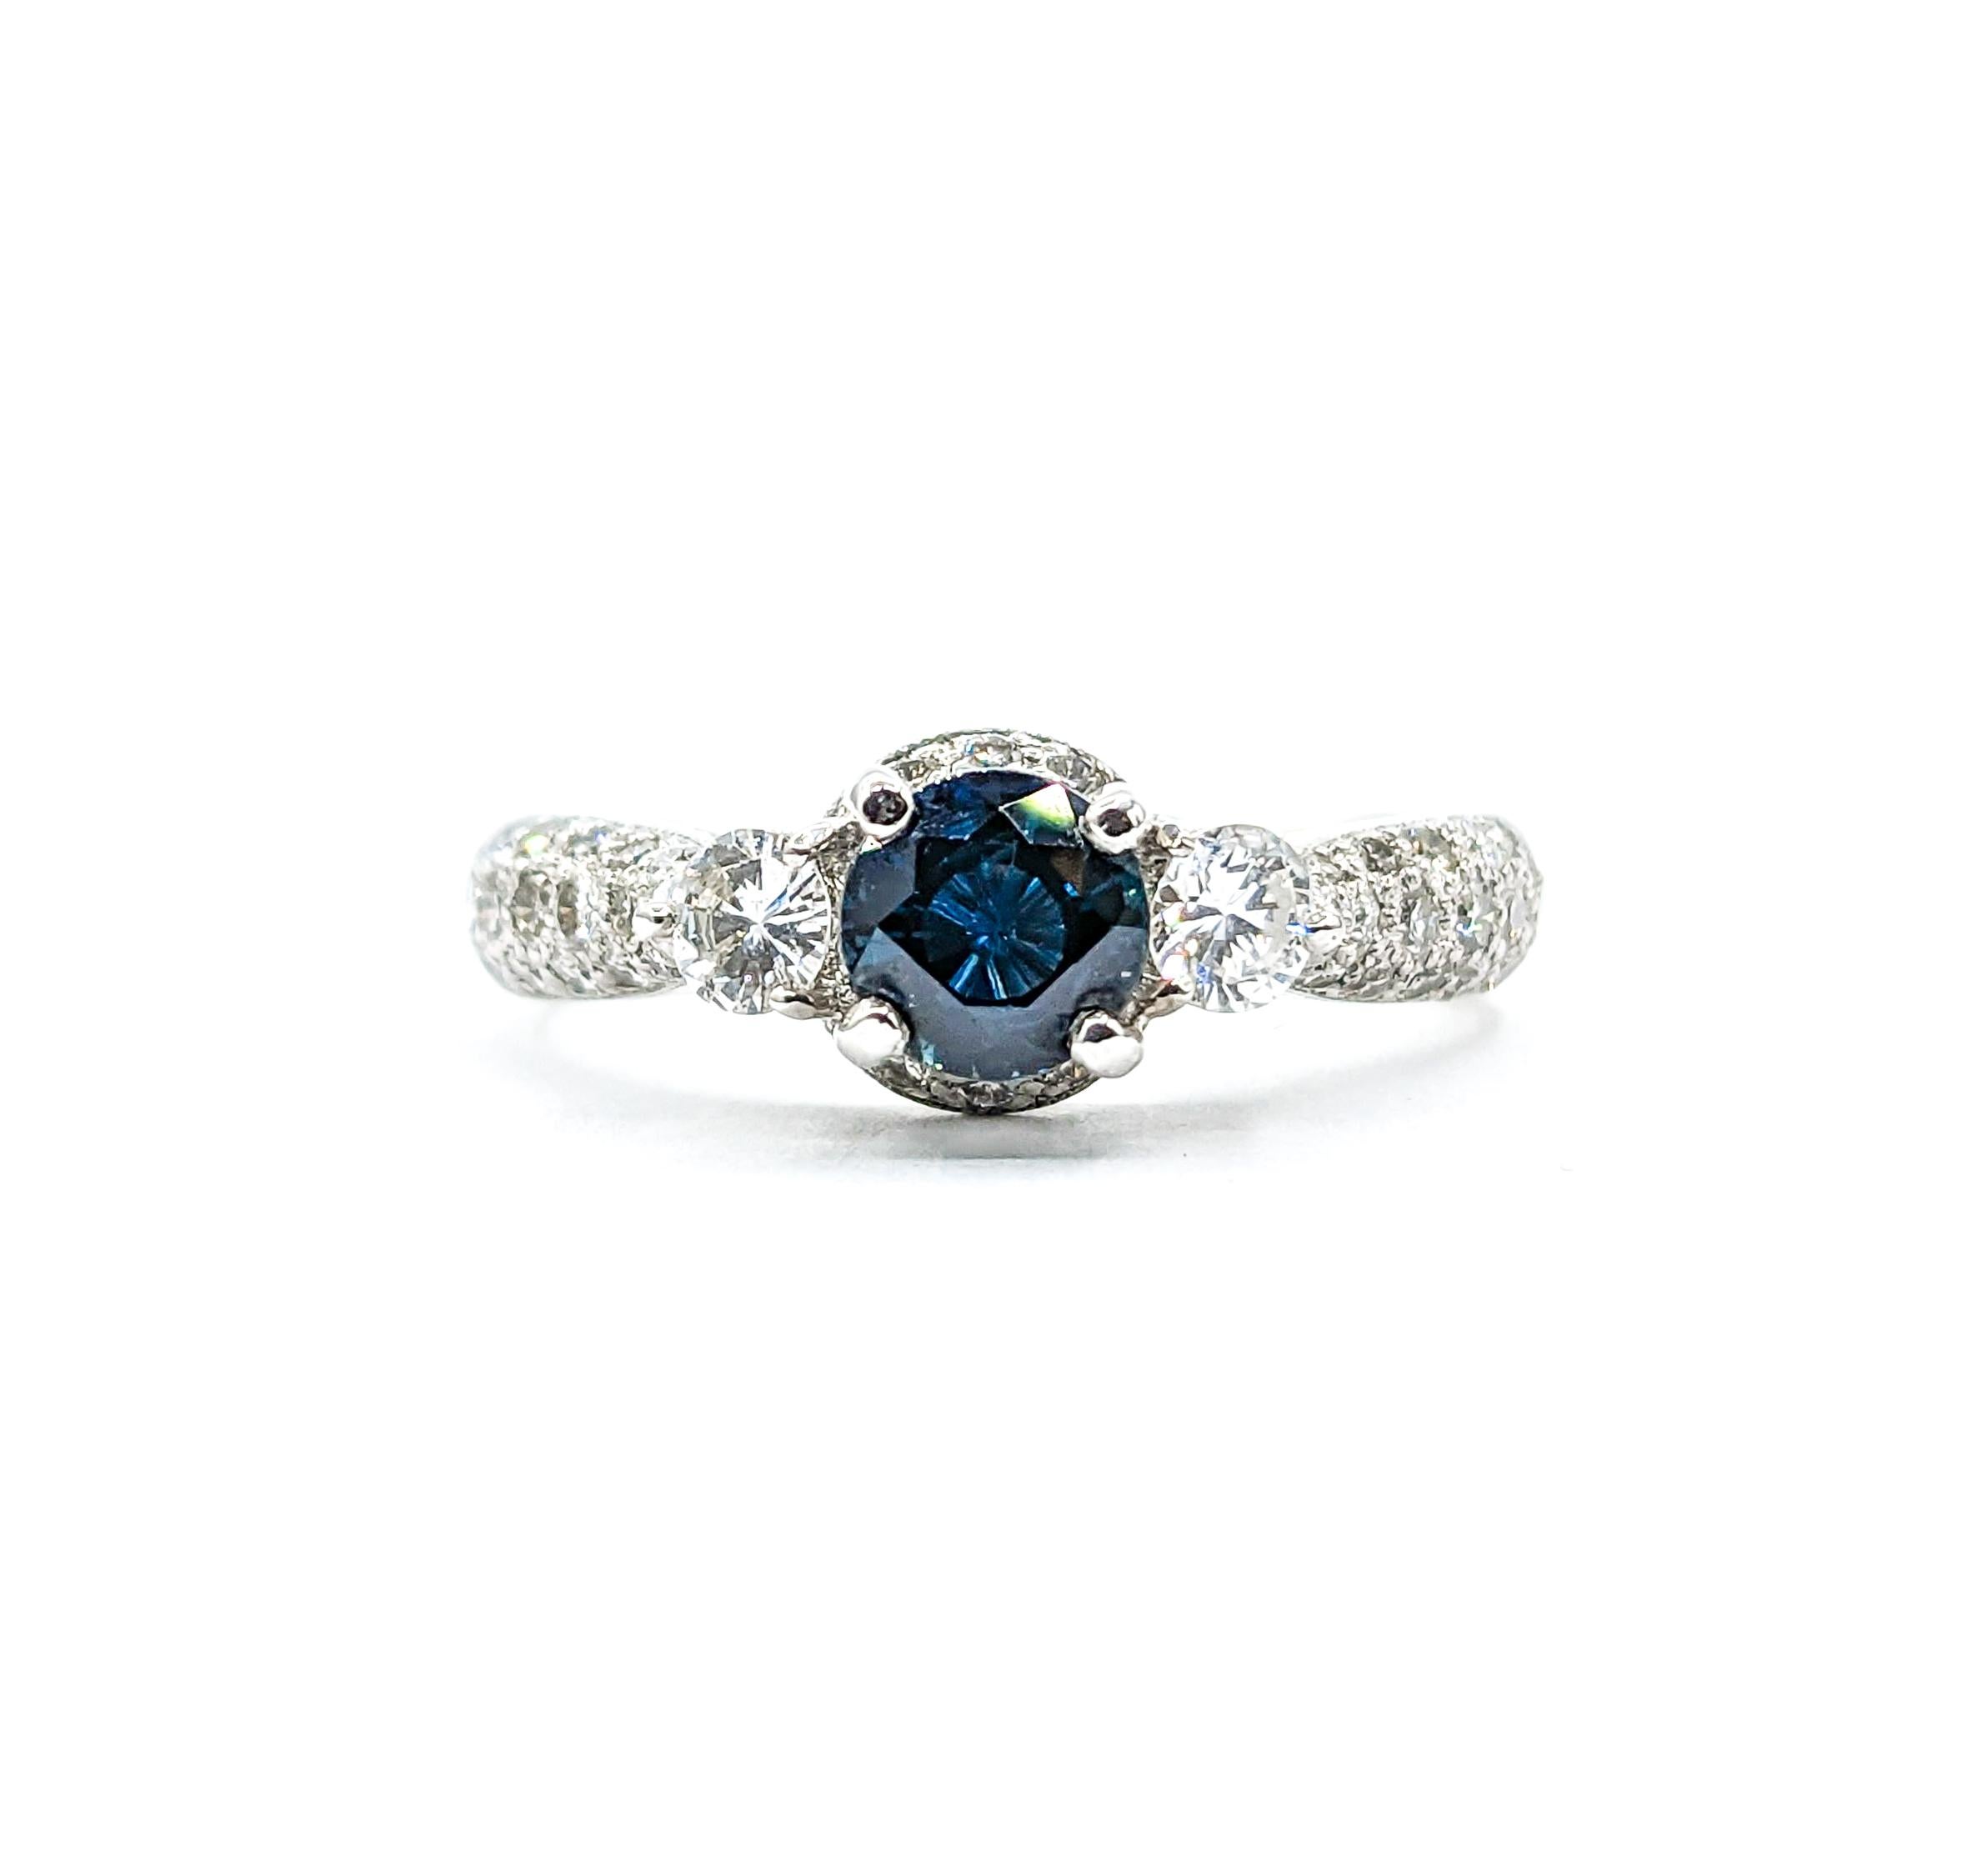 Delightful Sapphire & Diamond Engagement Ring - Platinum In Excellent Condition For Sale In Bloomington, MN